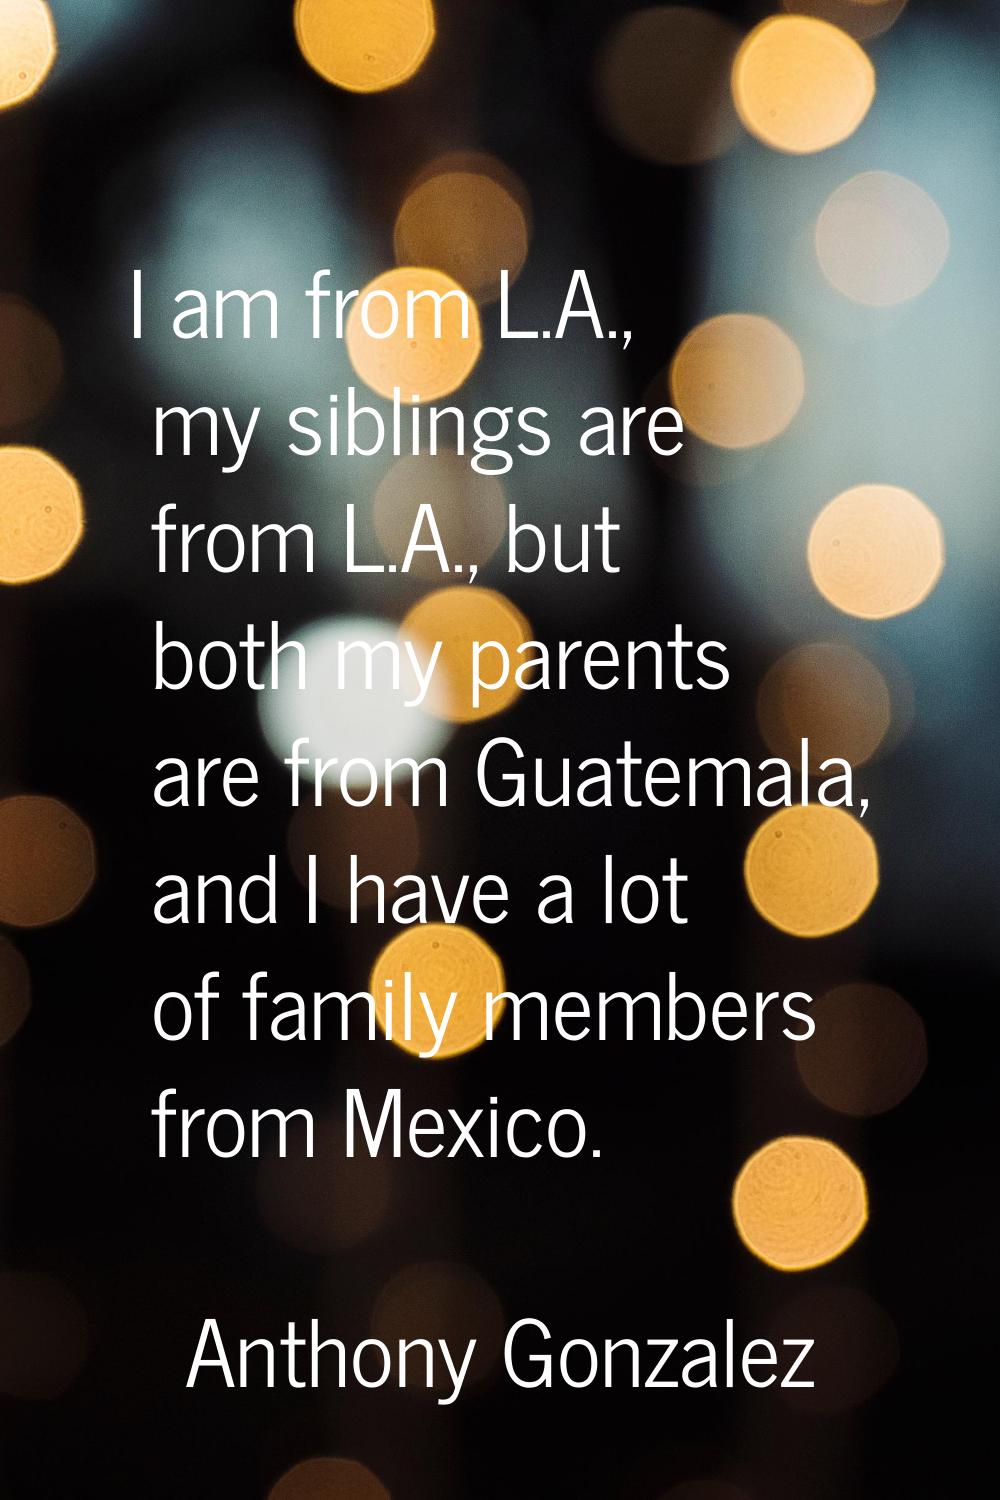 I am from L.A., my siblings are from L.A., but both my parents are from Guatemala, and I have a lot